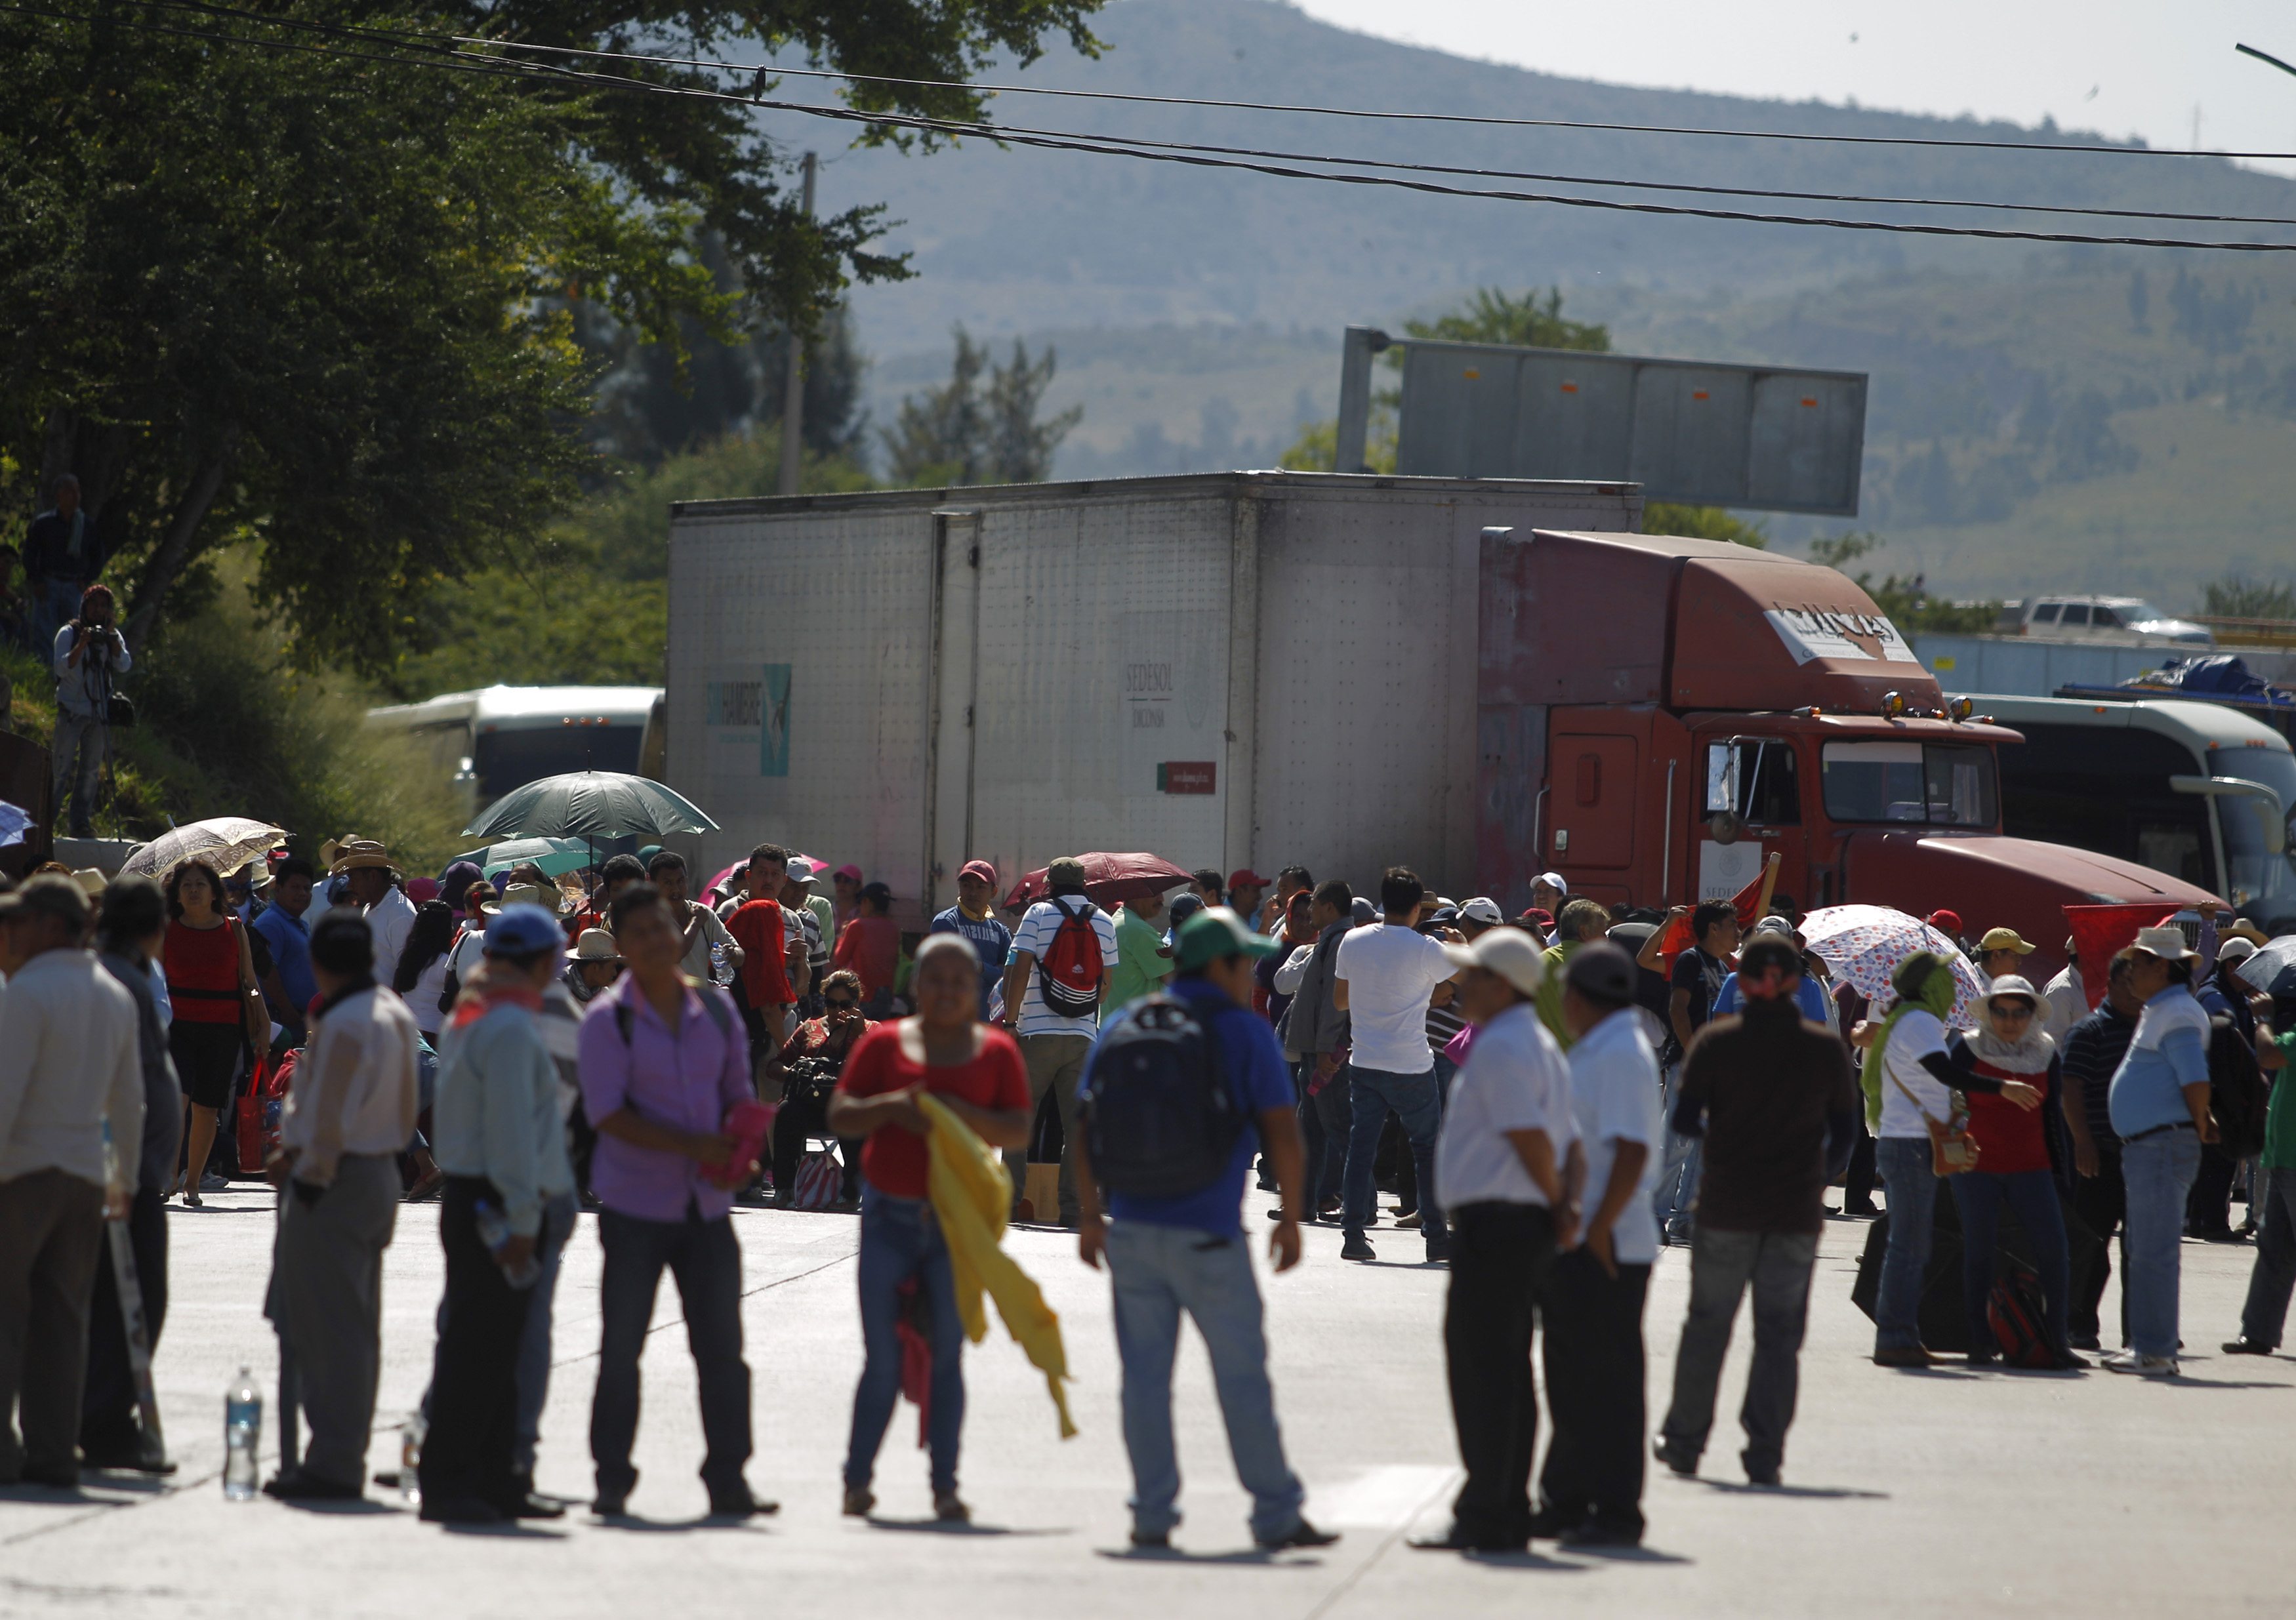 CETEG members (State Coordinator of Teachers of Guerrero) take part in a blockade on a road leading to Acapulco on the outskirts of Chilpancingo in Guerrero state, during a protest to show support for 43 missing students. (Photo: Reuters)